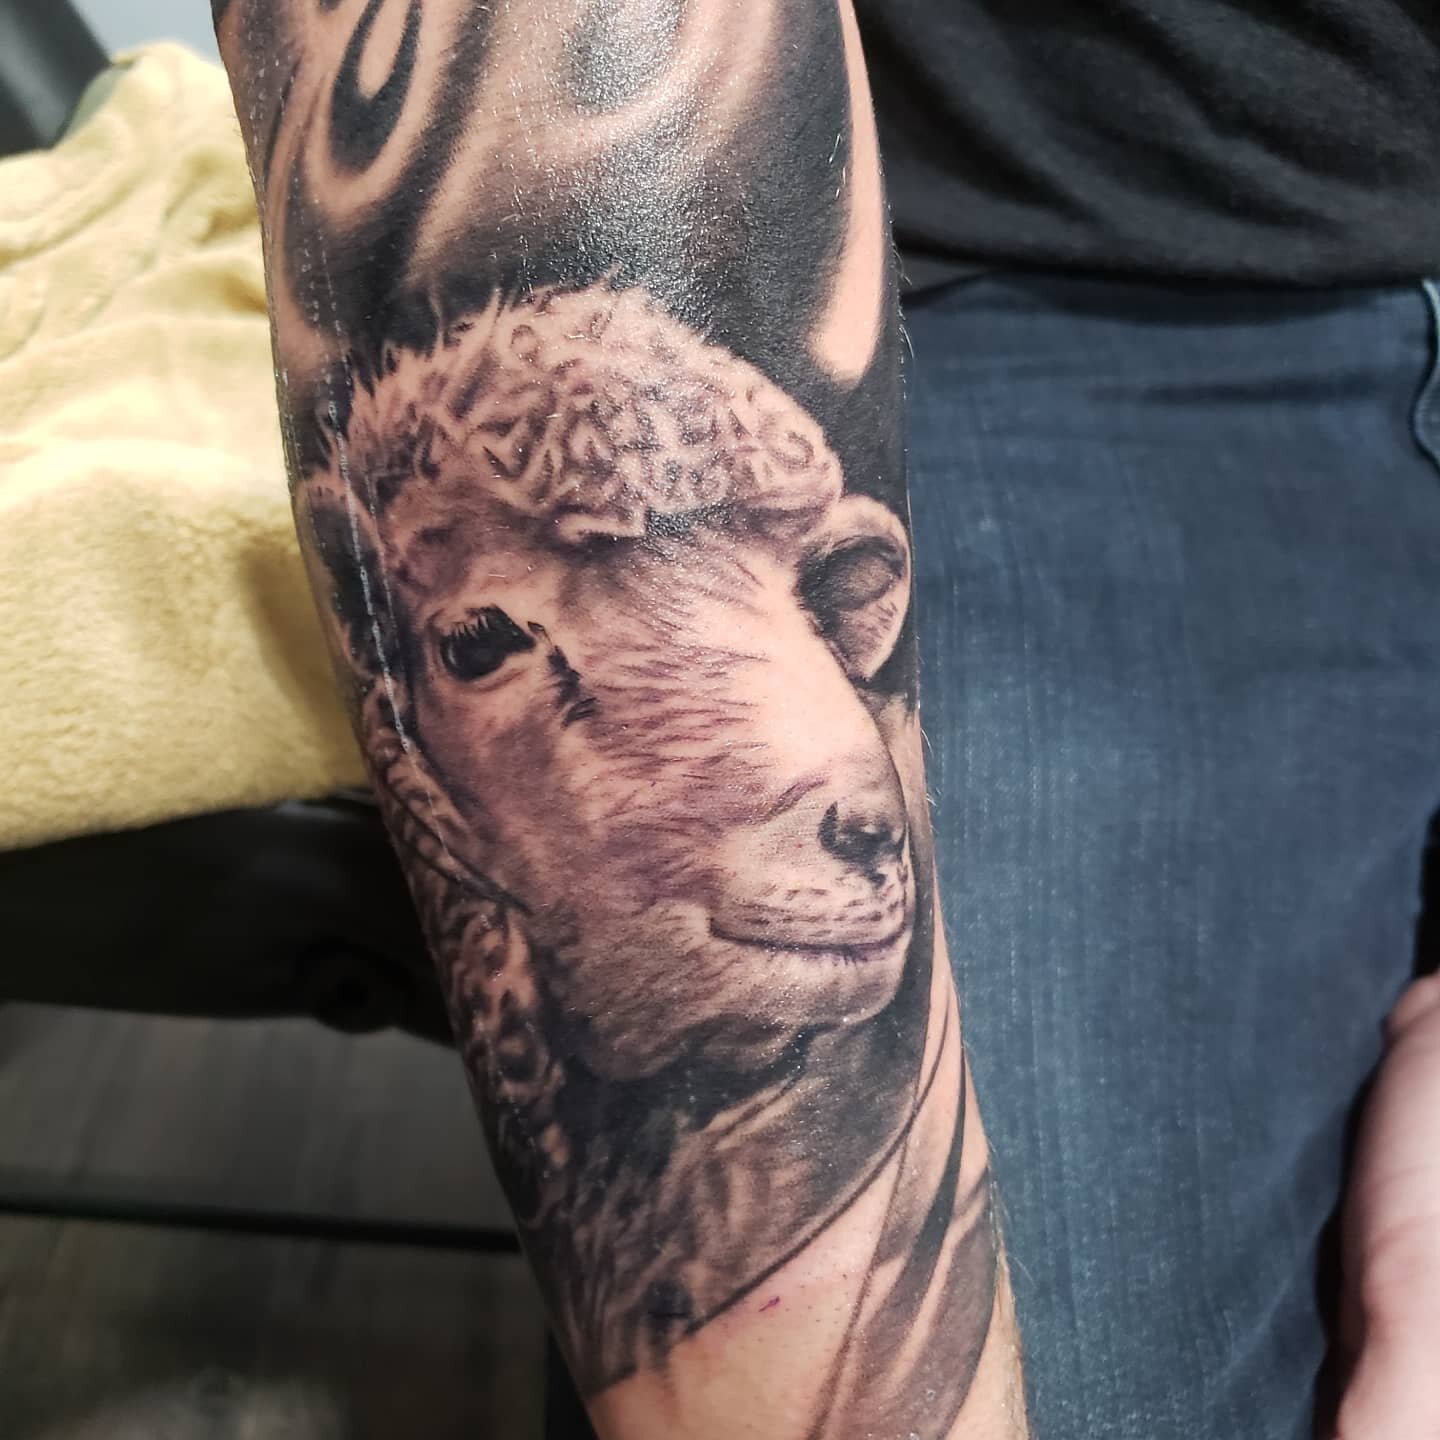 A little lamb for ya! This guy always gives me the most fun stuff to do! Thanks Jordan! 
.
#LightningRevivalTattooCompany #LightningRevivalTattooCo #LightningRevivalTattoo #LightningRevival #LRTC #LRNate #Tattoo #Tattoos #ByronCenter #Michigan #Grand